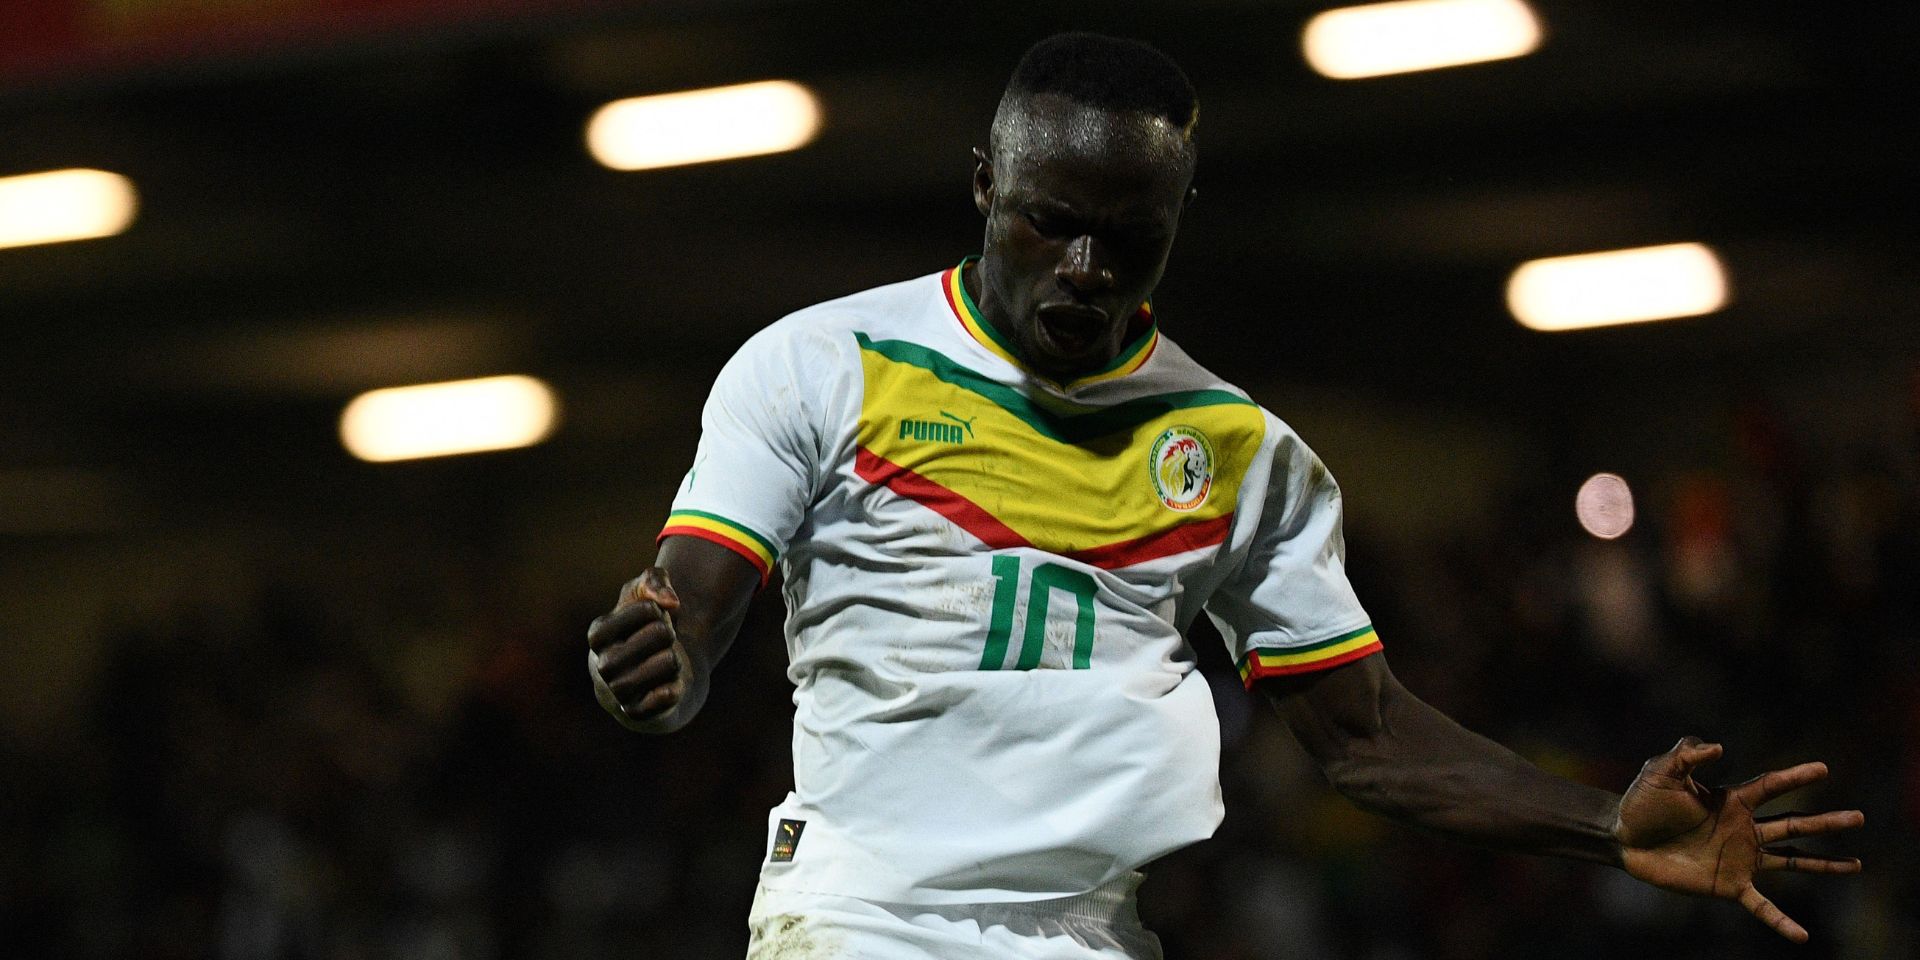 Sadio Mane shares emotional post after heartbreaking World Cup injury